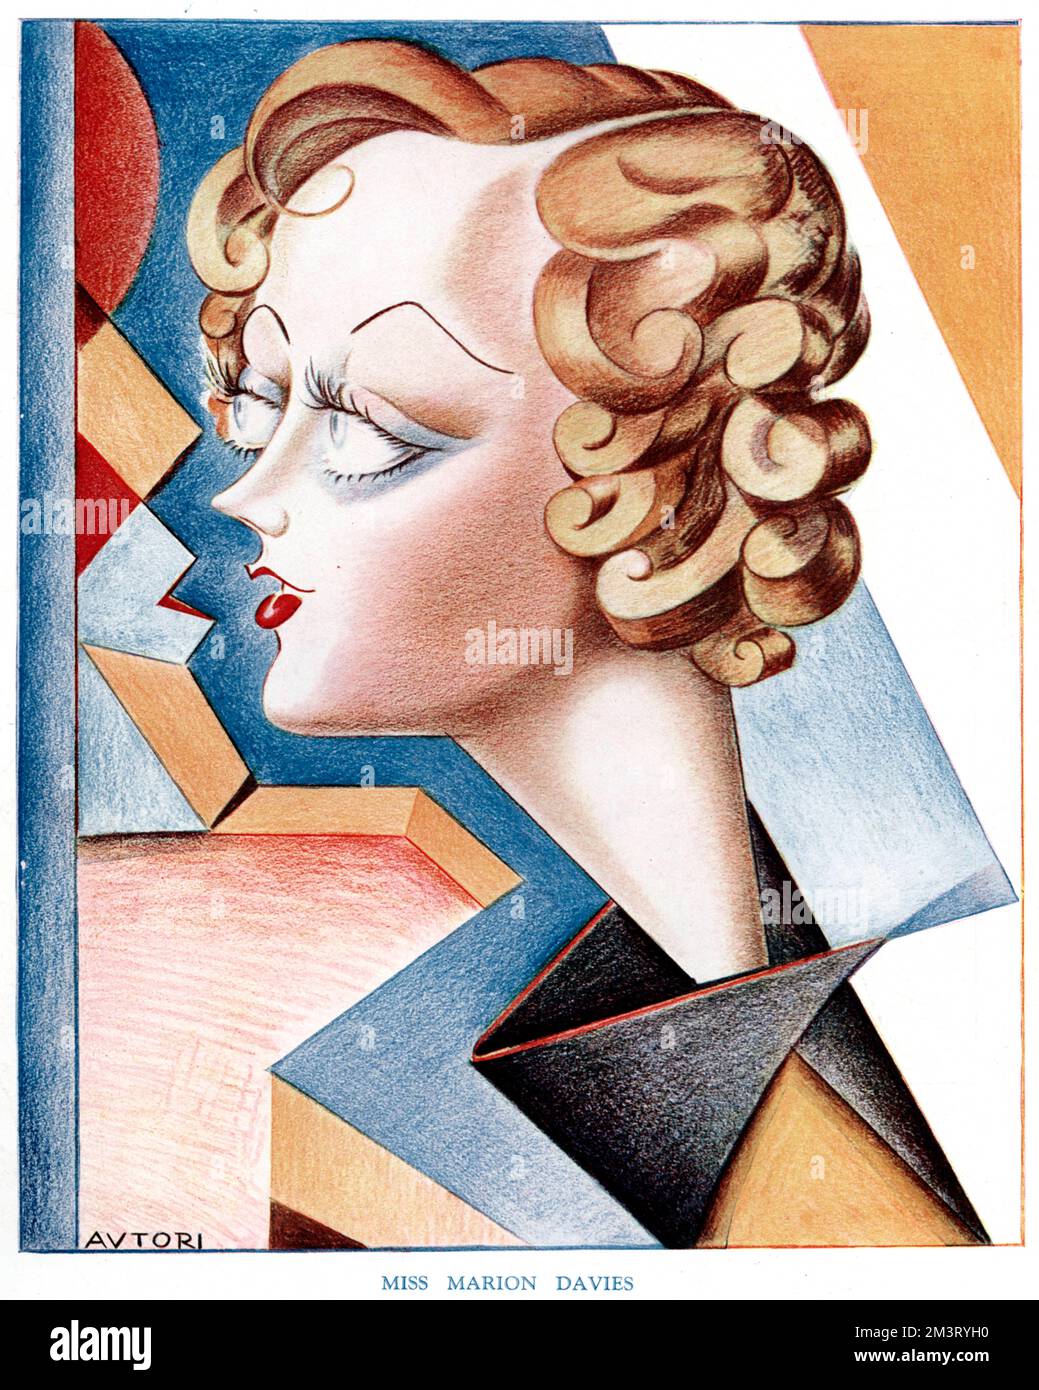 Caricature of Marion Davies (1897 - 1961), actress, producer, screenwriter, philanthropist and lover of William Randolph Hearst. Born Marion Douras, the daughter of a New York judge, she first rose to fame in the Ziegfeld Follies.     Date: 1931 Stock Photo